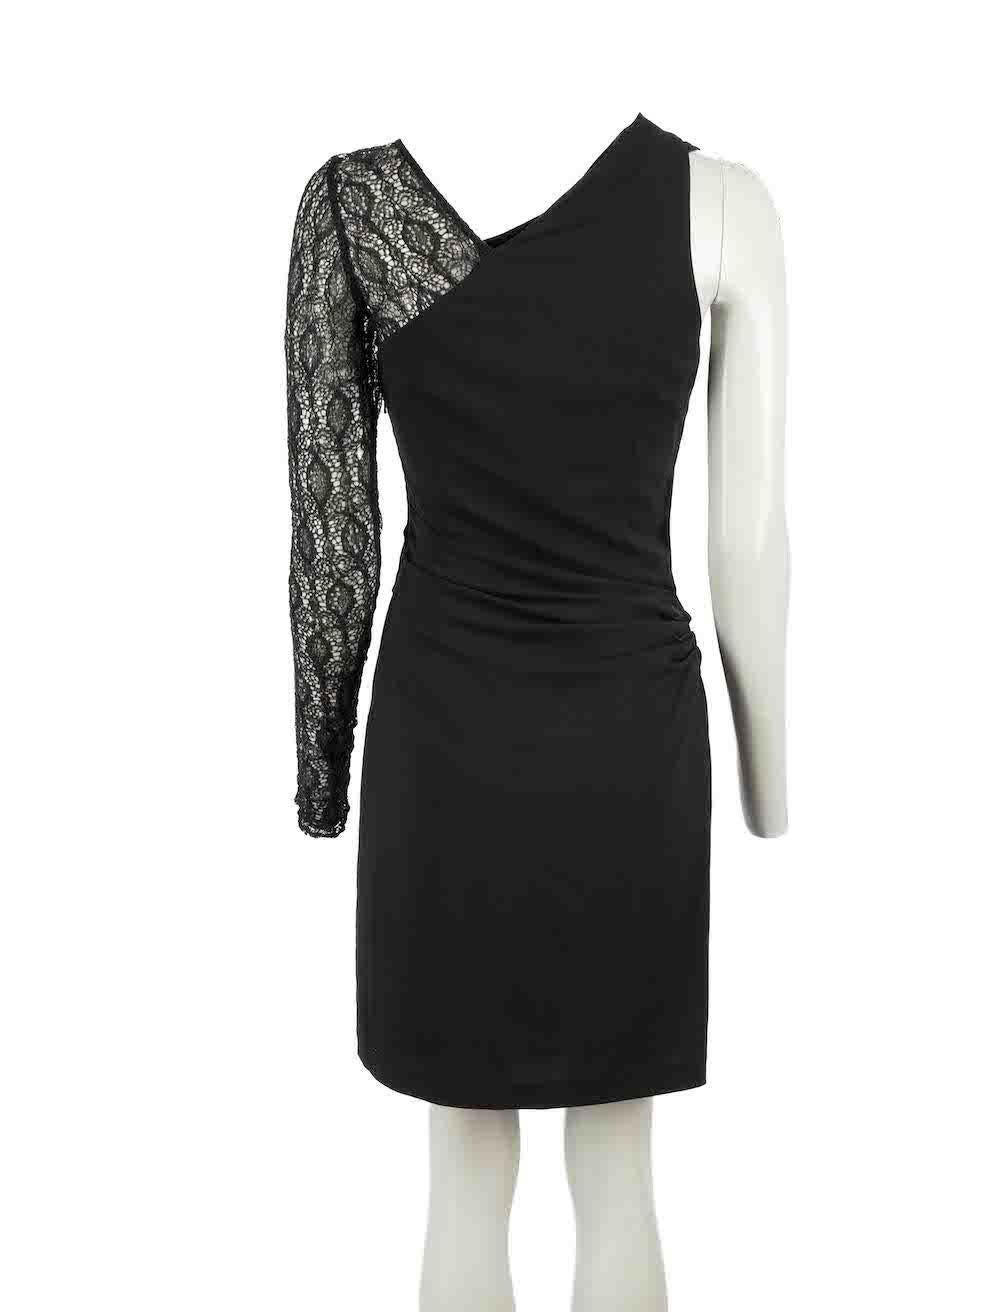 Helmut Lang Black Asymmetric Lace Mini Dress Size M In Good Condition For Sale In London, GB